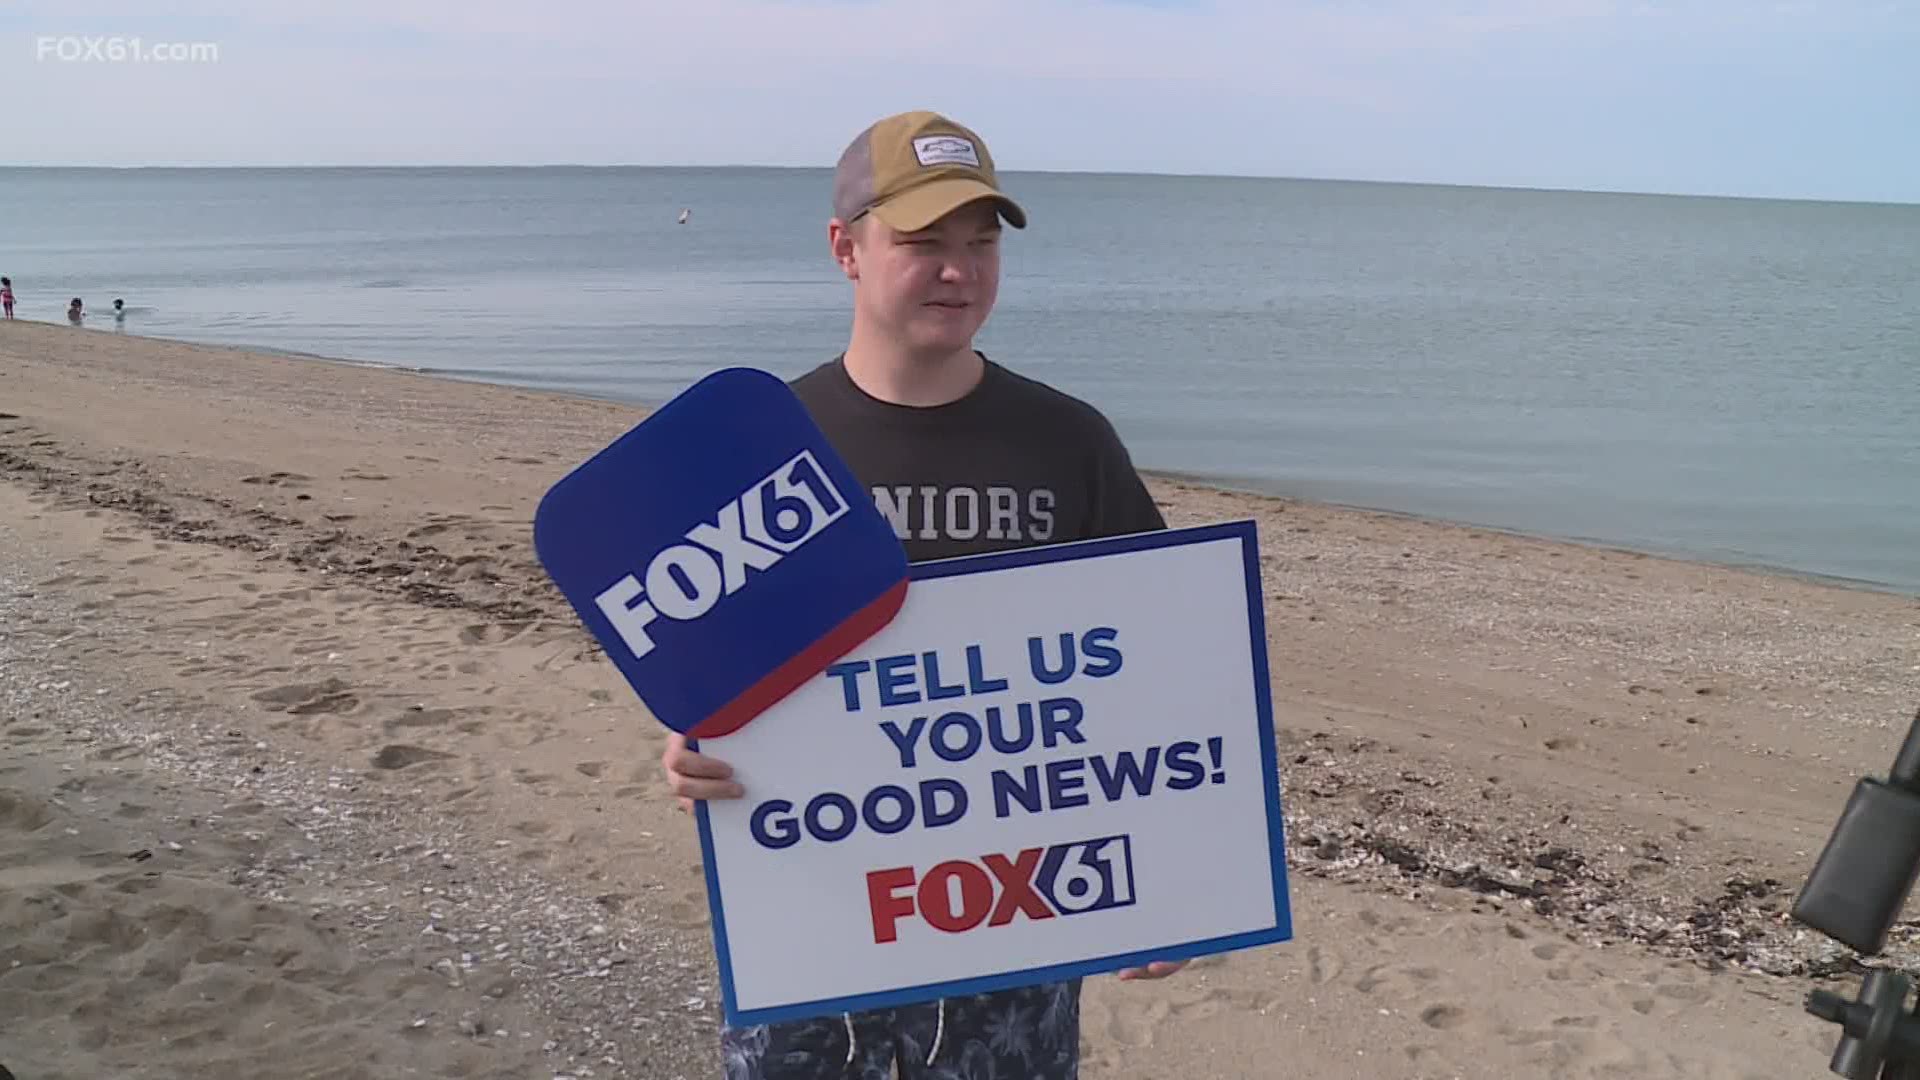 Keith McGilvery was asking this morning on the beach